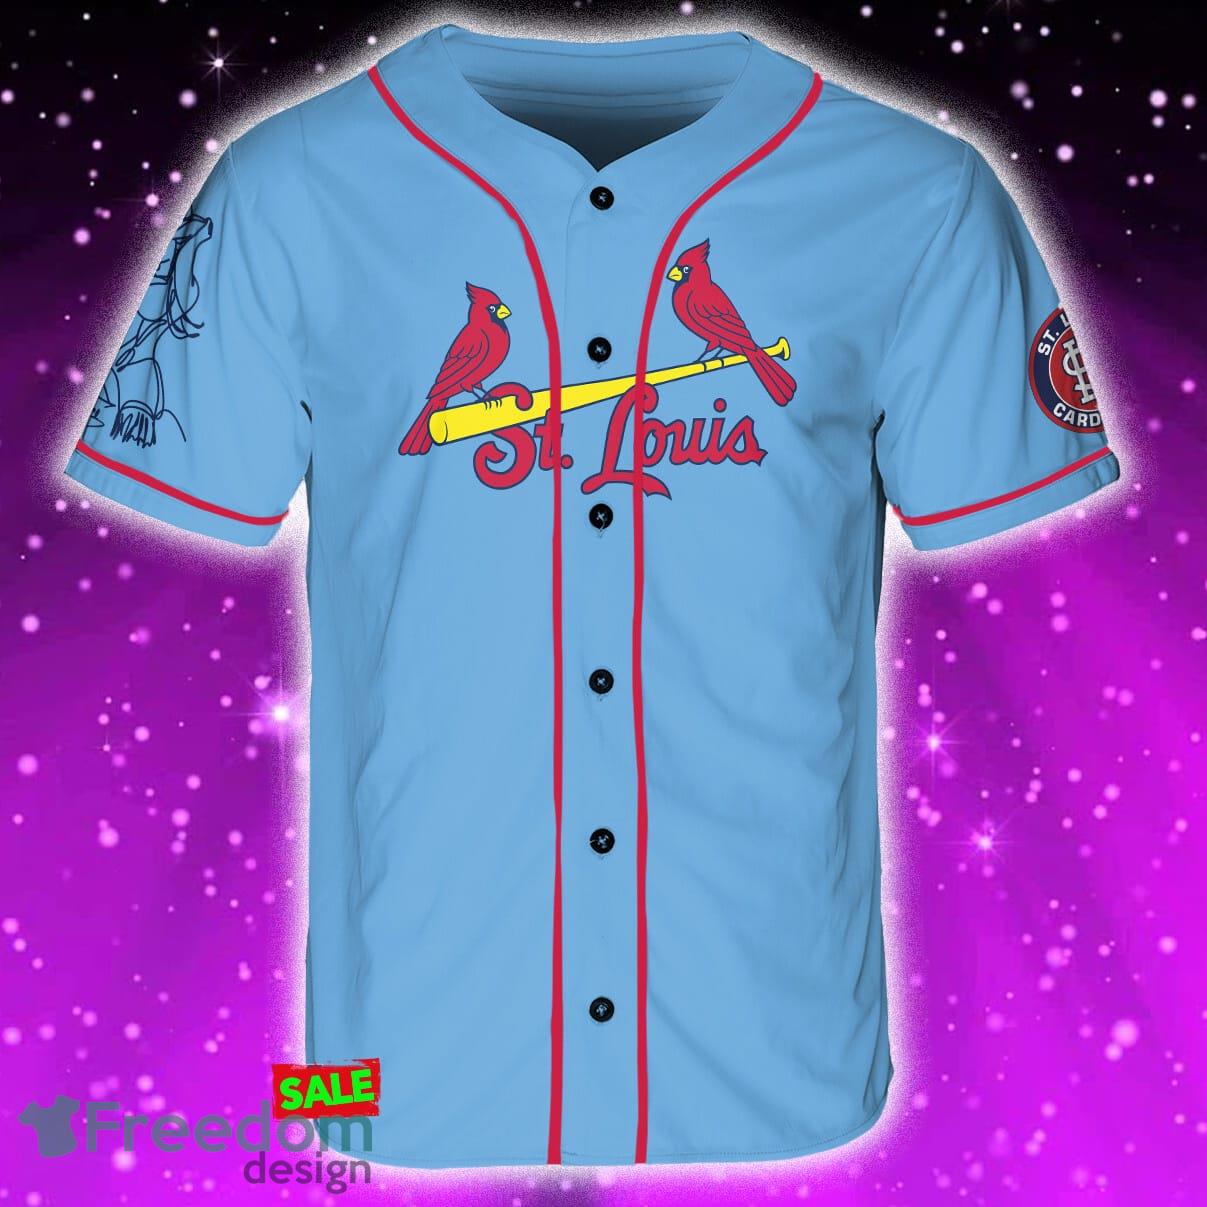 light blue and red baseball jersey